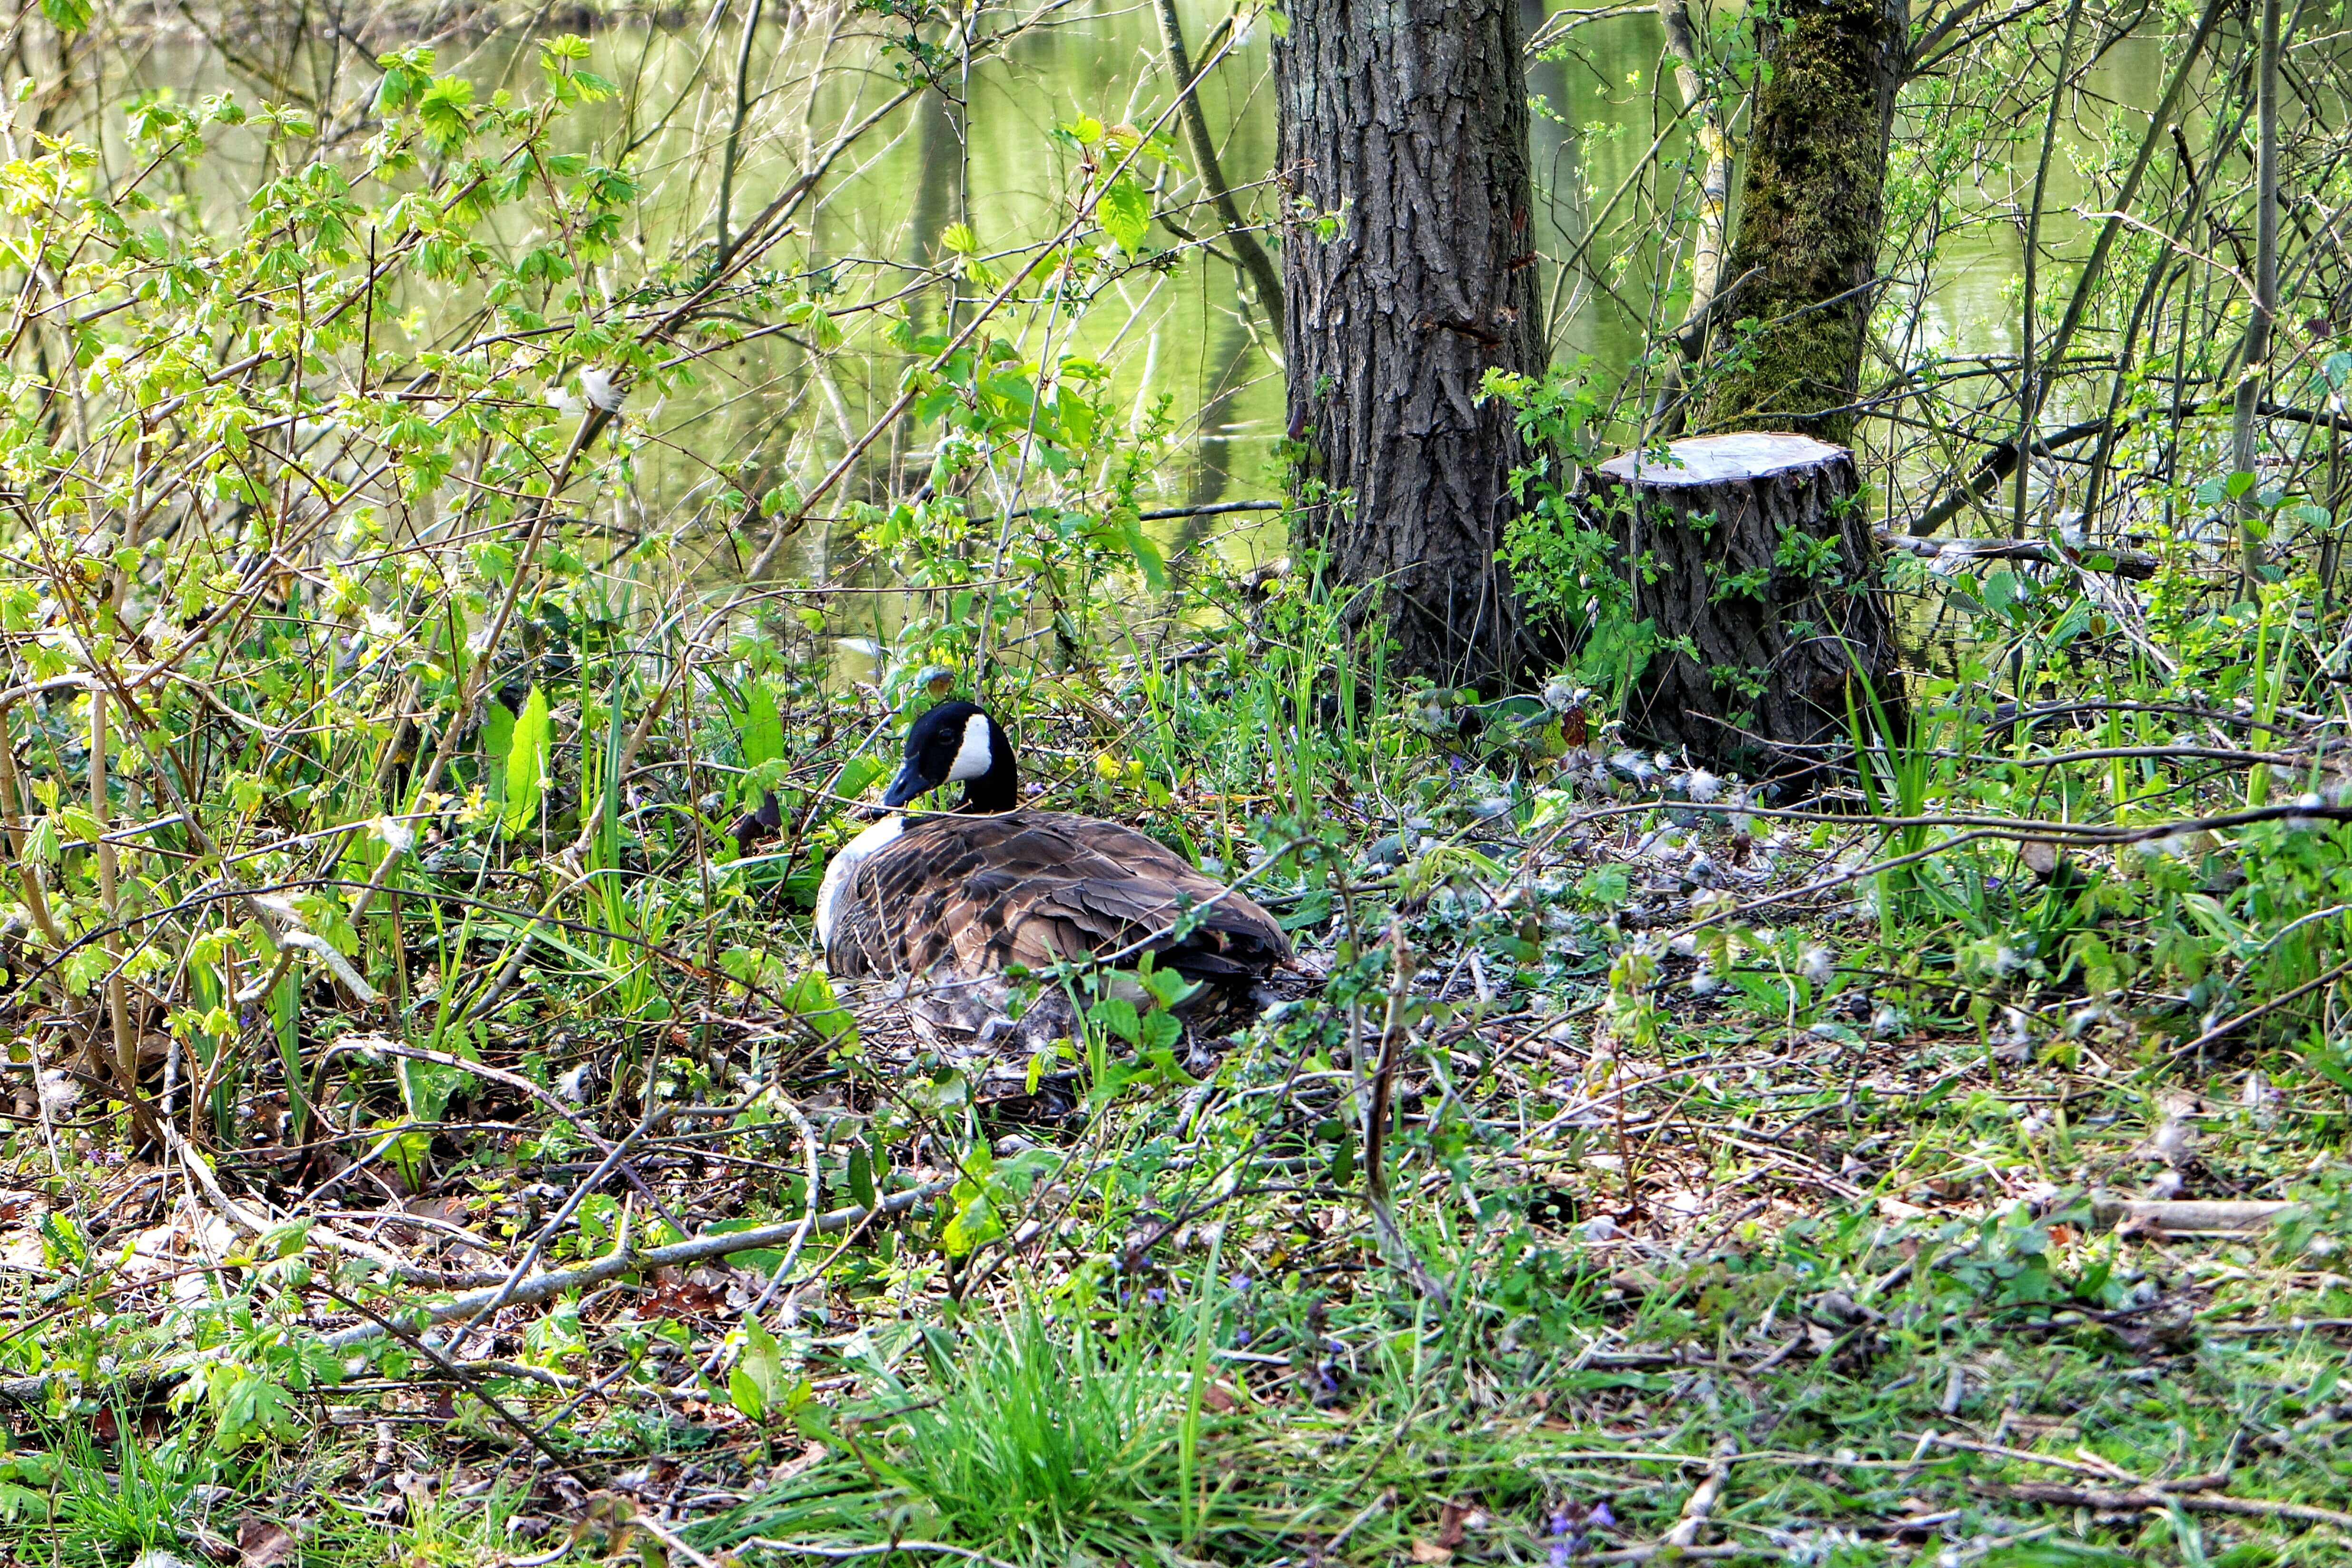 A nesting Canada Goose nestles in the undergrowth